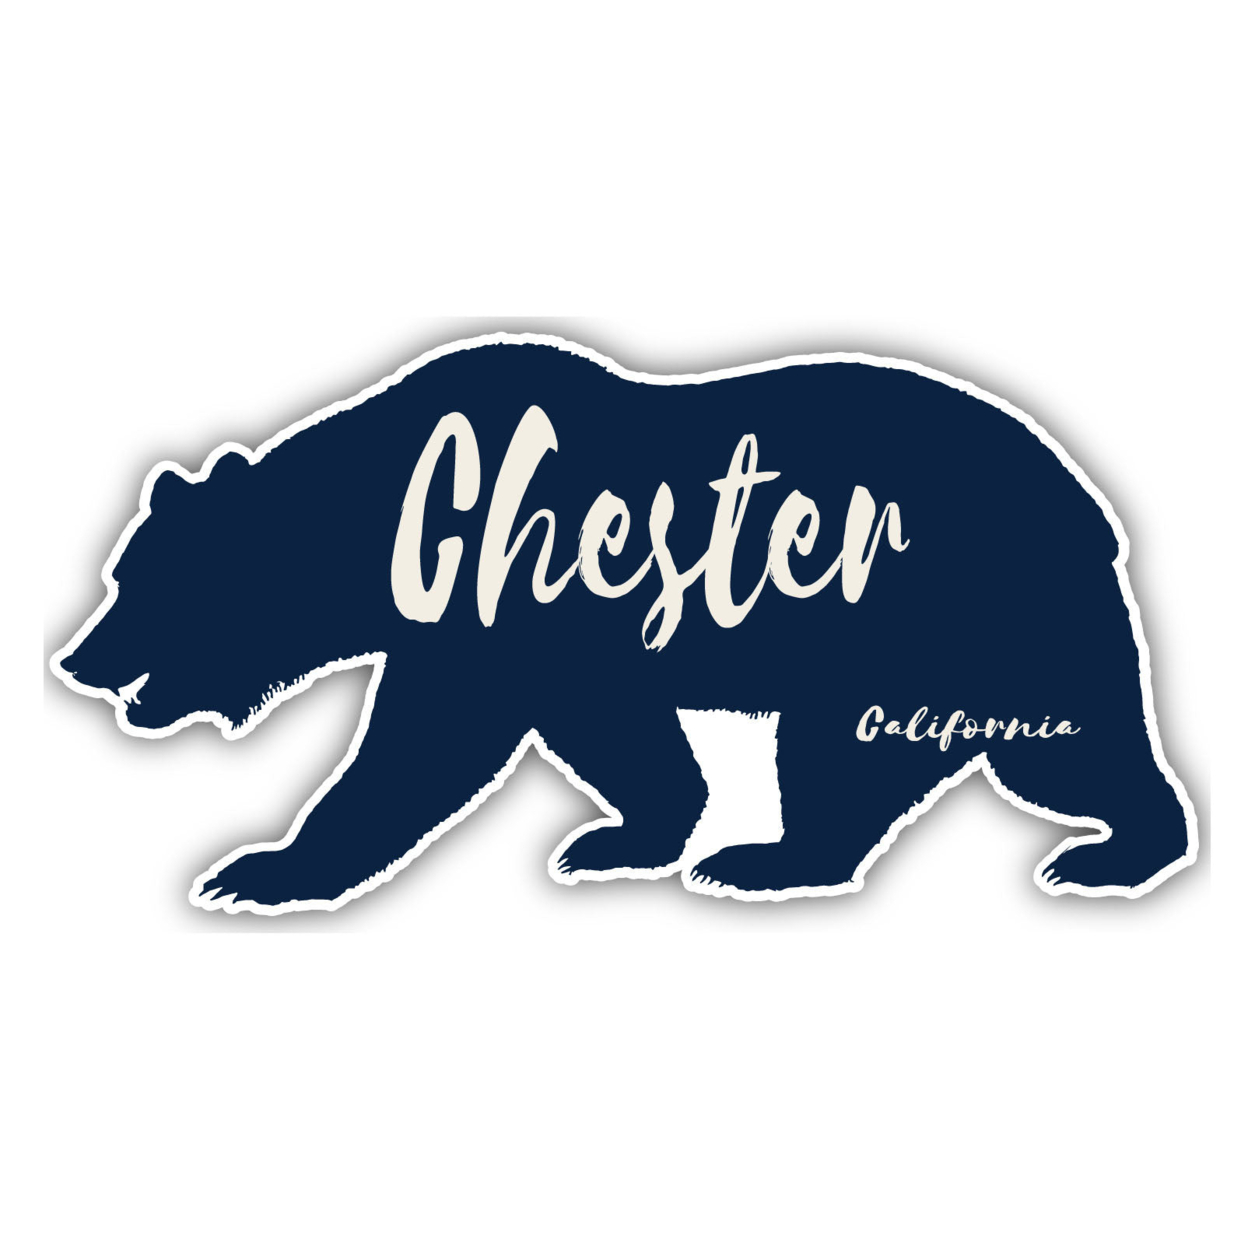 Chester California Souvenir Decorative Stickers (Choose Theme And Size) - 4-Pack, 2-Inch, Great Outdoors